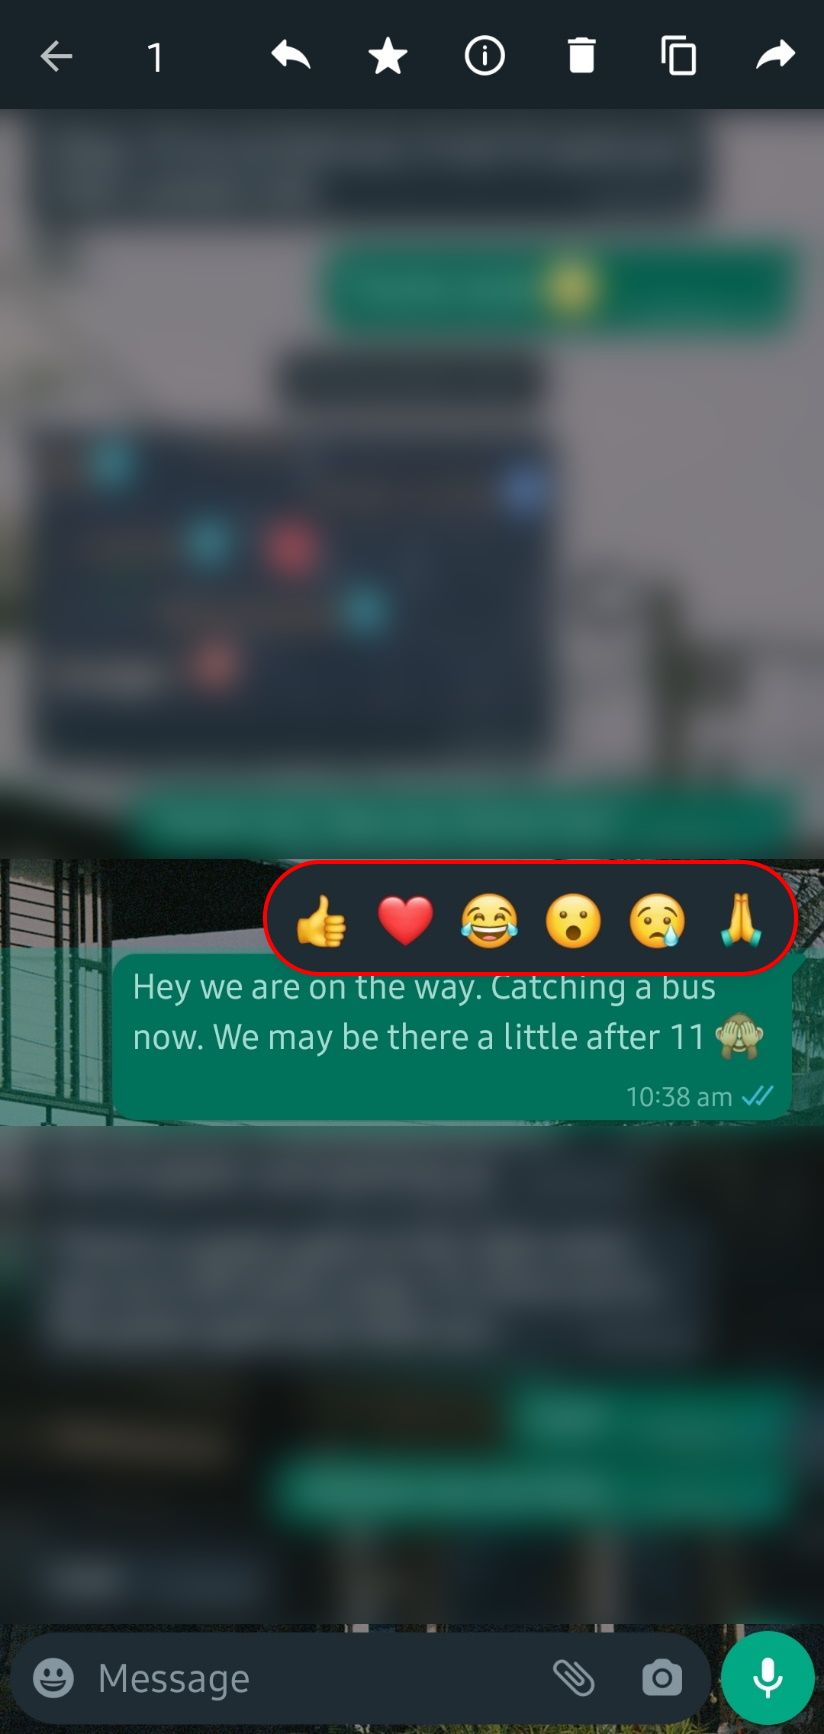 whatsapp chat with a reaction pop-up with several emoji available to react to the message with